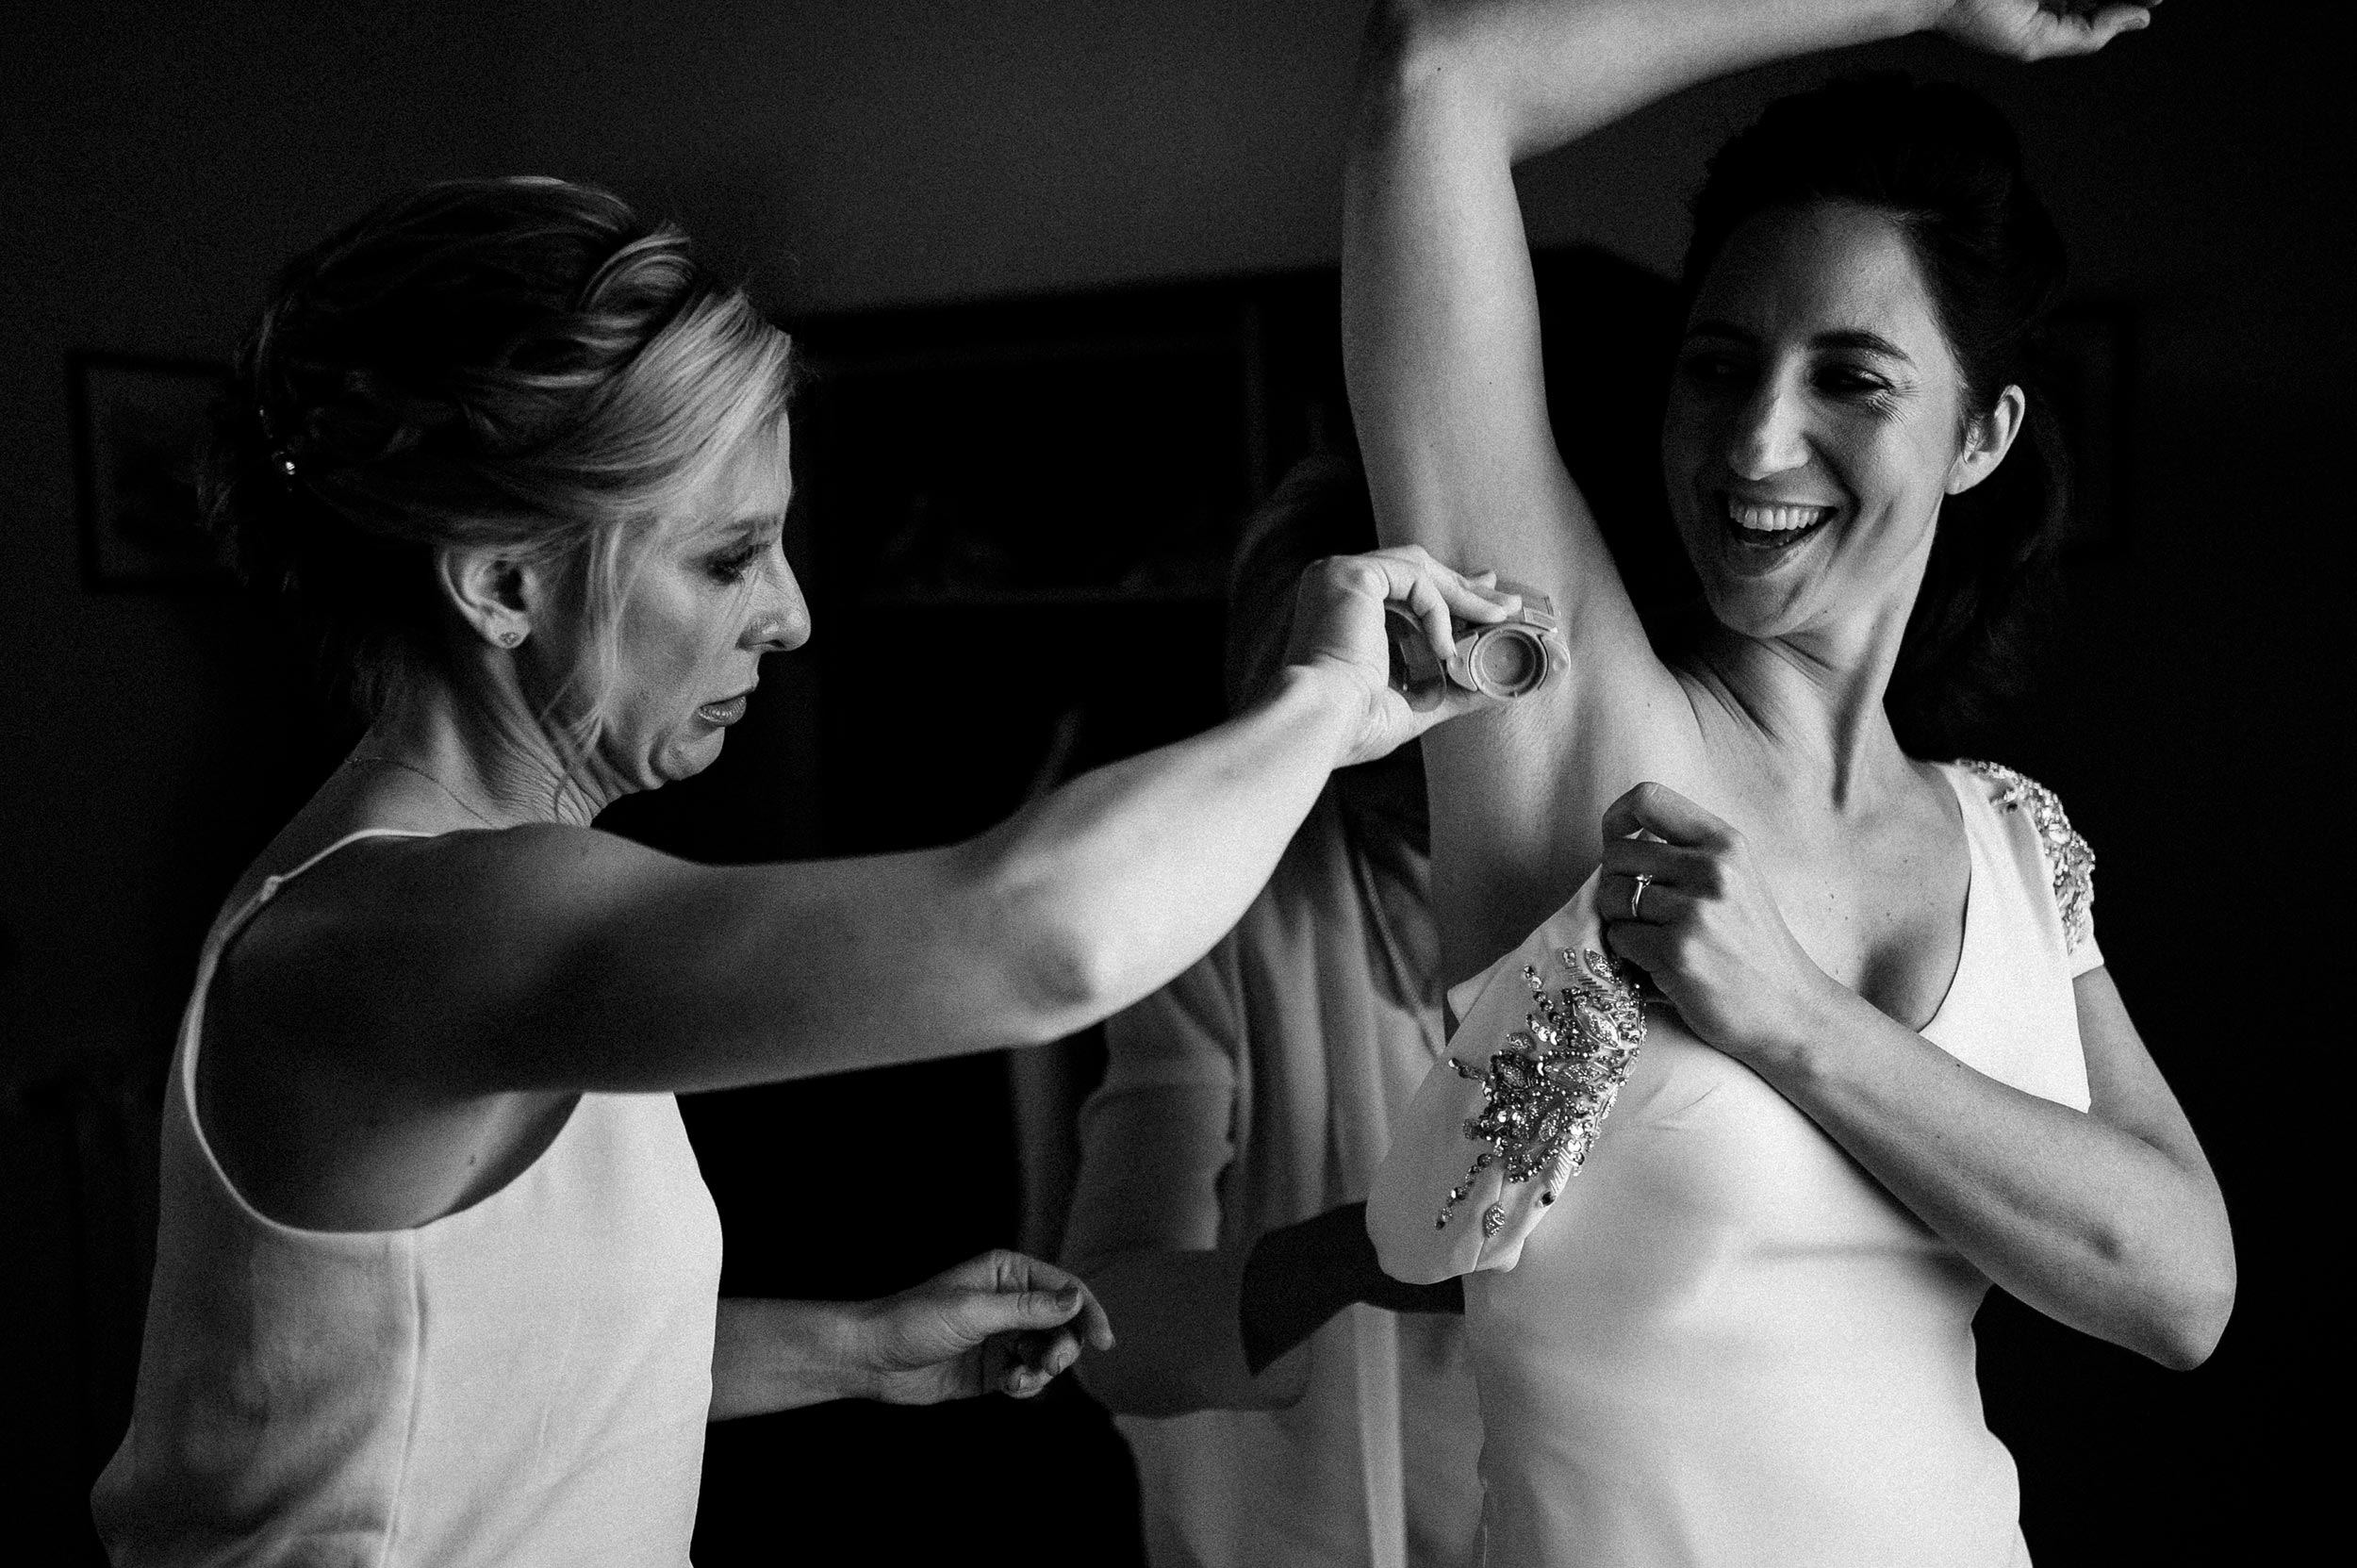 Bride getting ready with her friend putting deodorant stick on. Candid wedding photos.